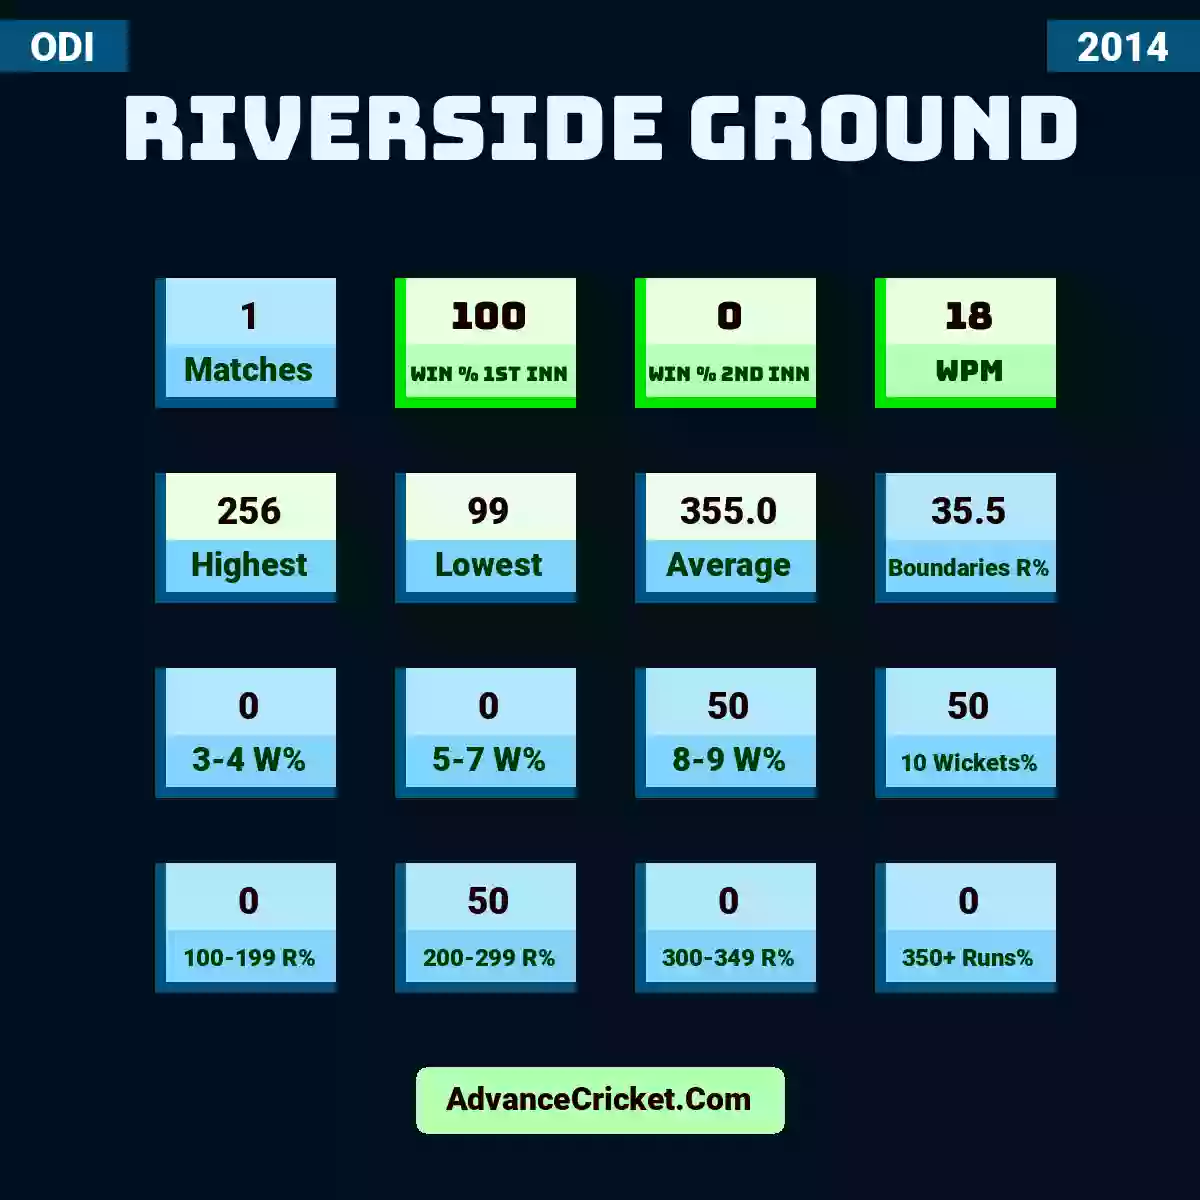 Image showing Riverside Ground with Matches: 1, Win % 1st Inn: 100, Win % 2nd Inn: 0, WPM: 18, Highest: 256, Lowest: 99, Average: 355.0, Boundaries R%: 35.5, 3-4 W%: 0, 5-7 W%: 0, 8-9 W%: 50, 10 Wickets%: 50, 100-199 R%: 0, 200-299 R%: 50, 300-349 R%: 0, 350+ Runs%: 0.